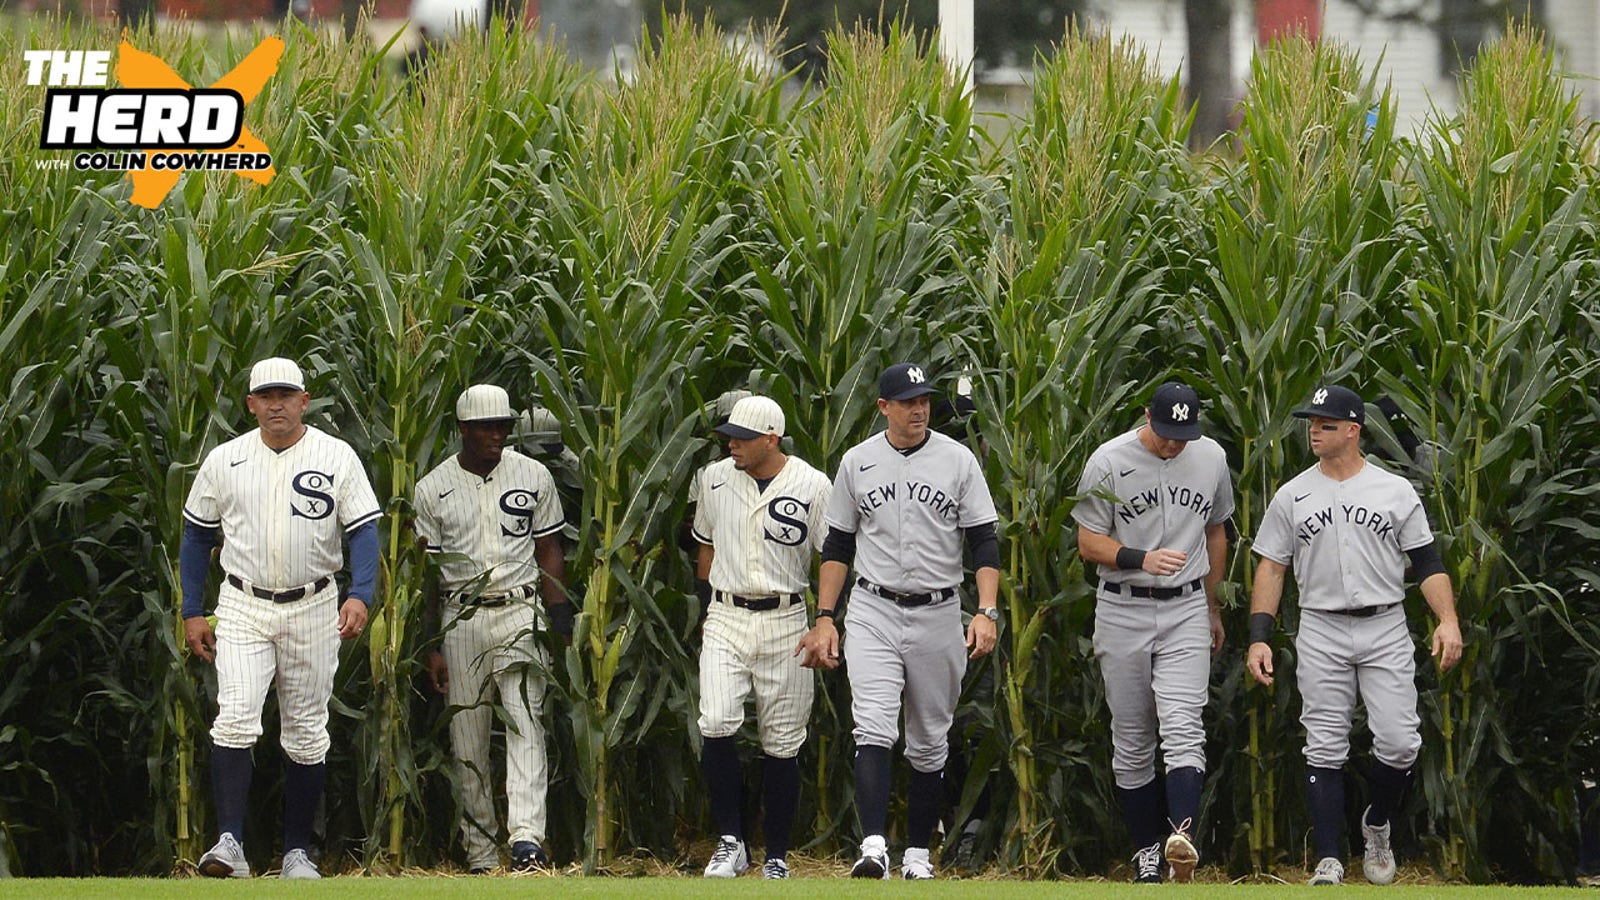 Field of Dreams Game 2022: Discovering essence of Dyersville